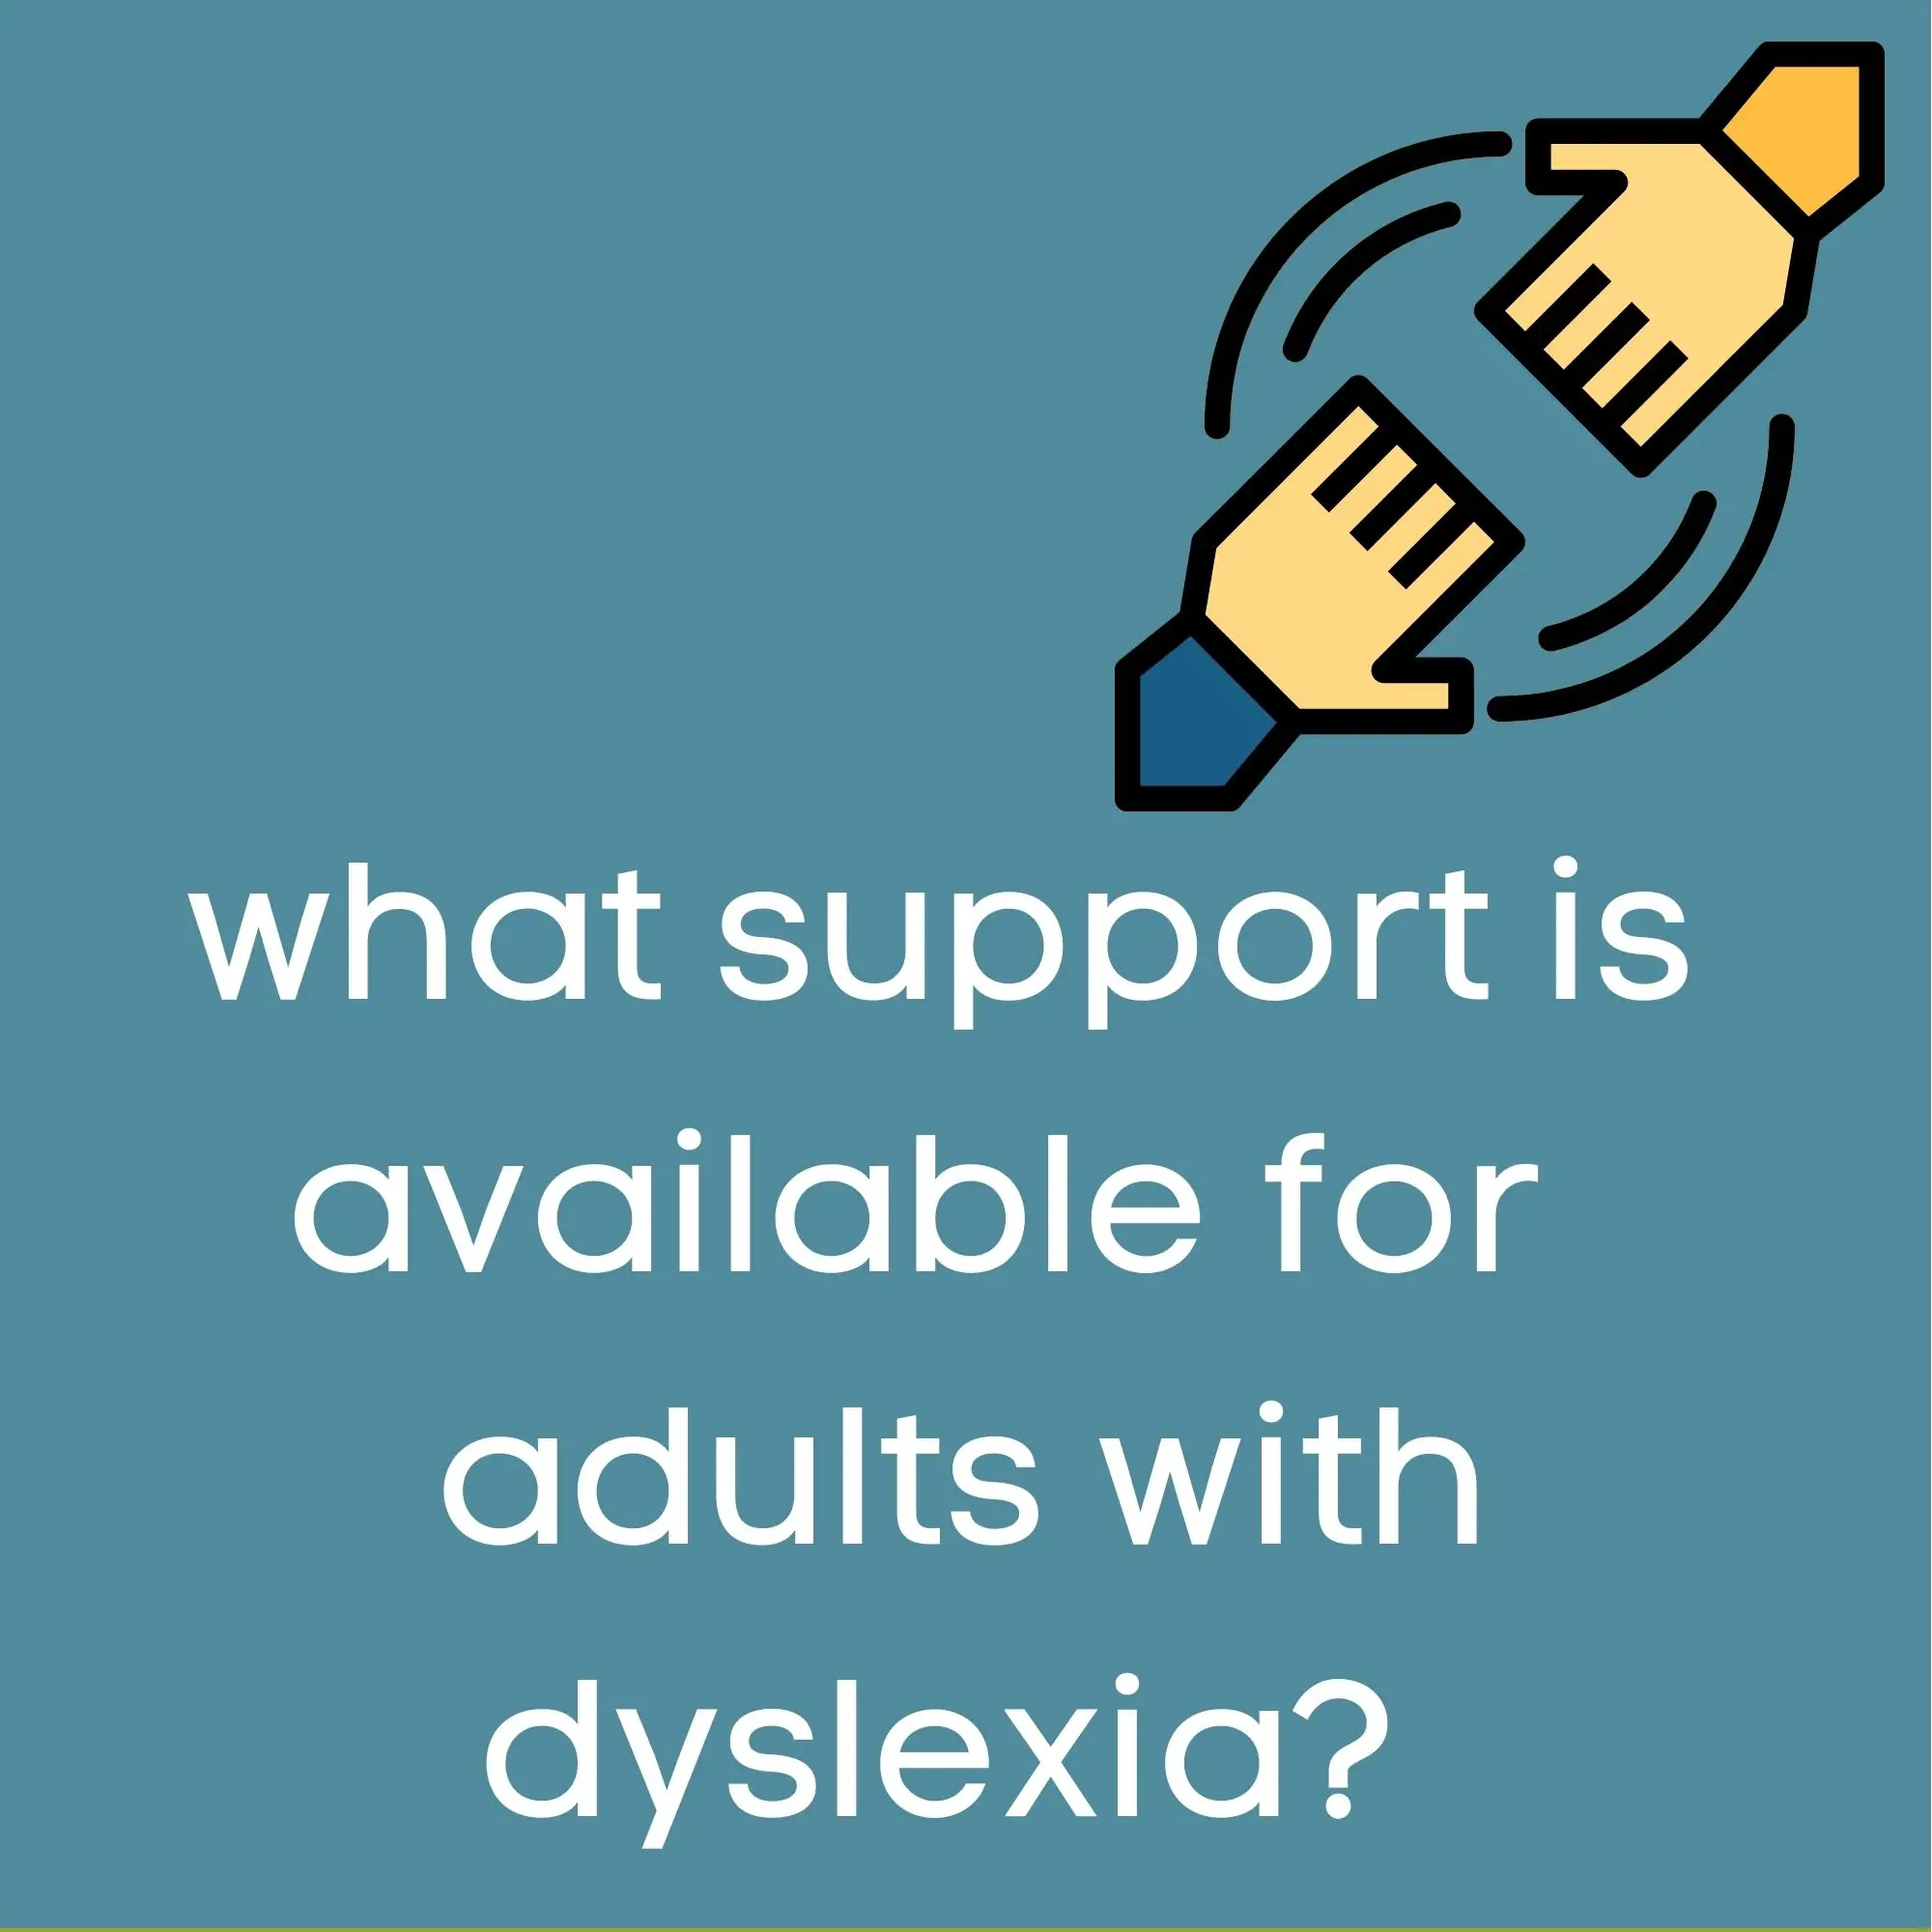 What support can help adults with dyslexia? » My Kind of Thinking